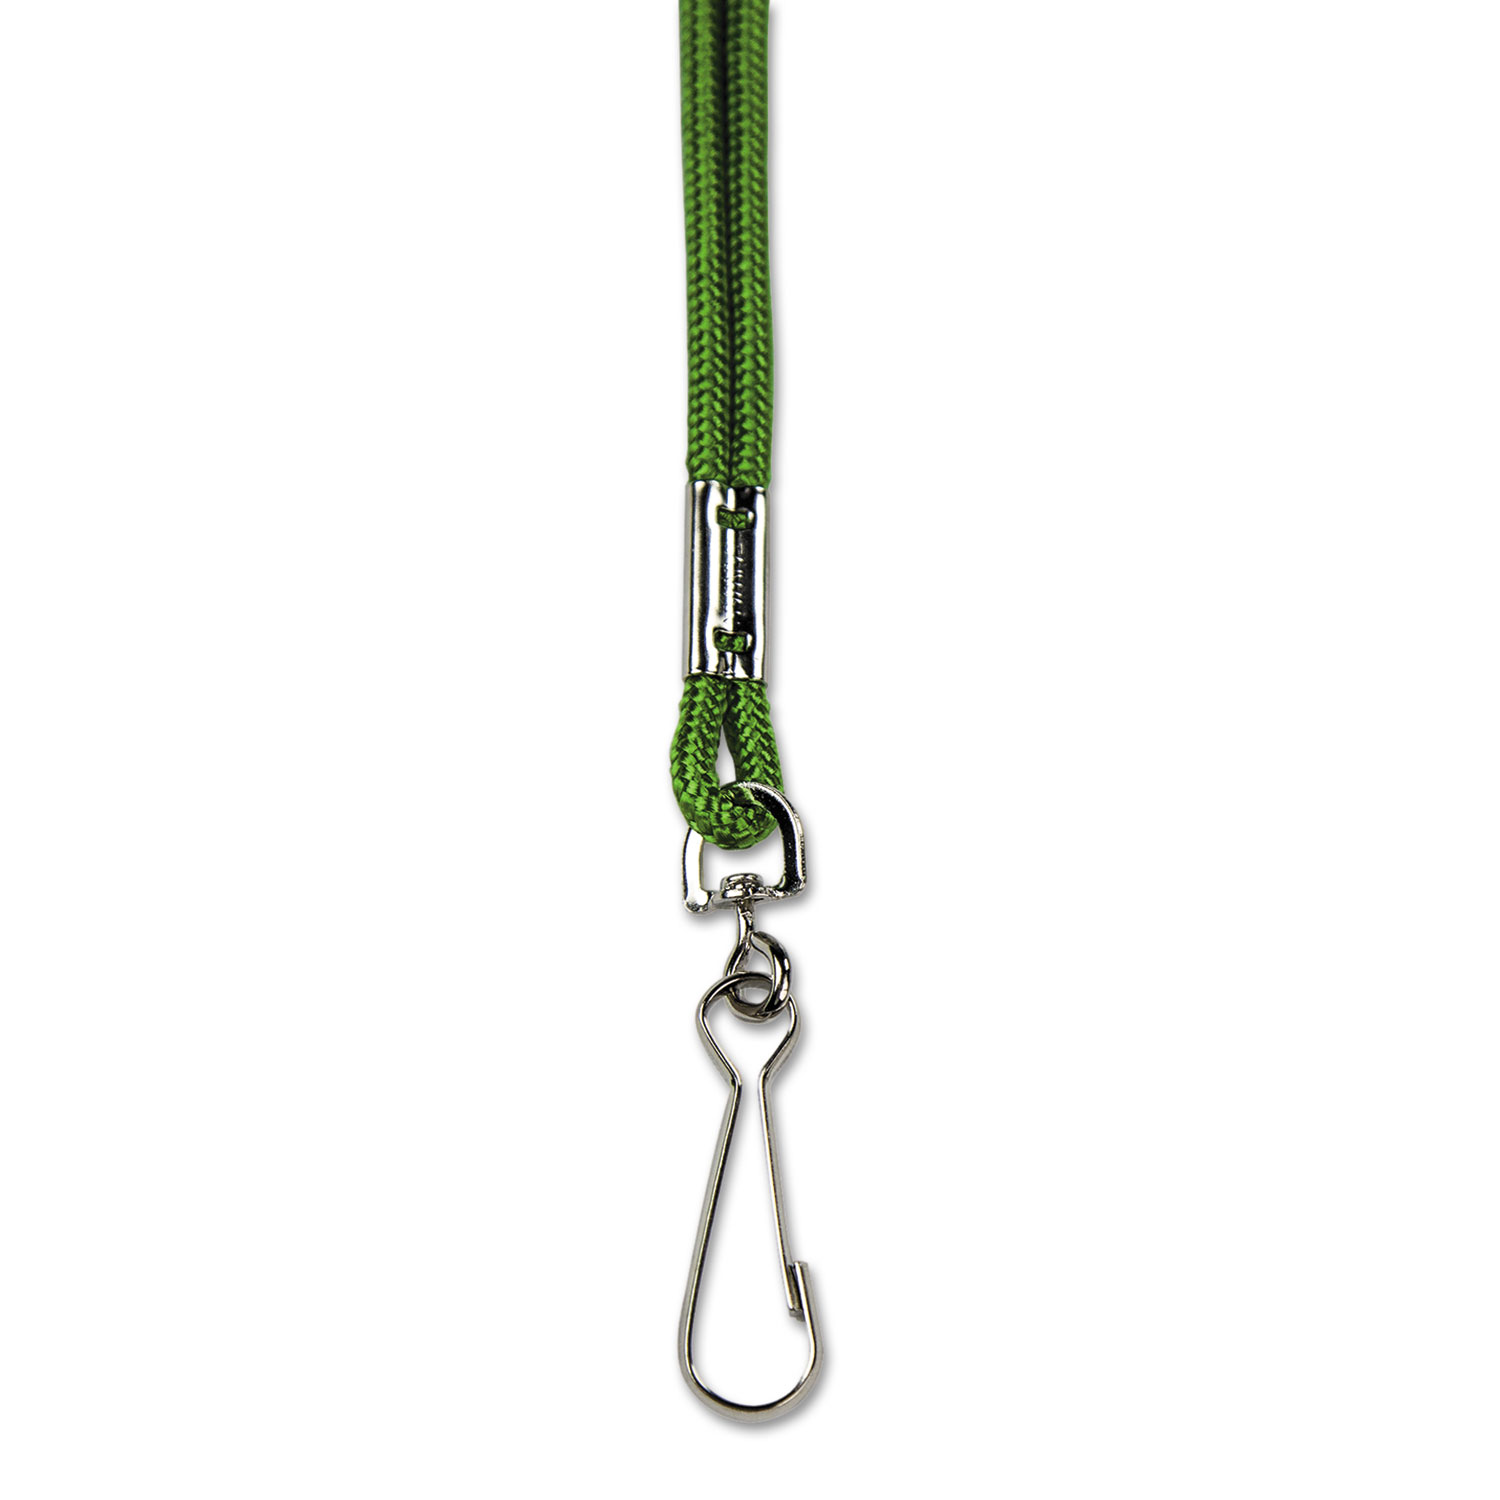 Lanyard, J-Hook Style, 22 Long, Assorted Colors, 12/Pack